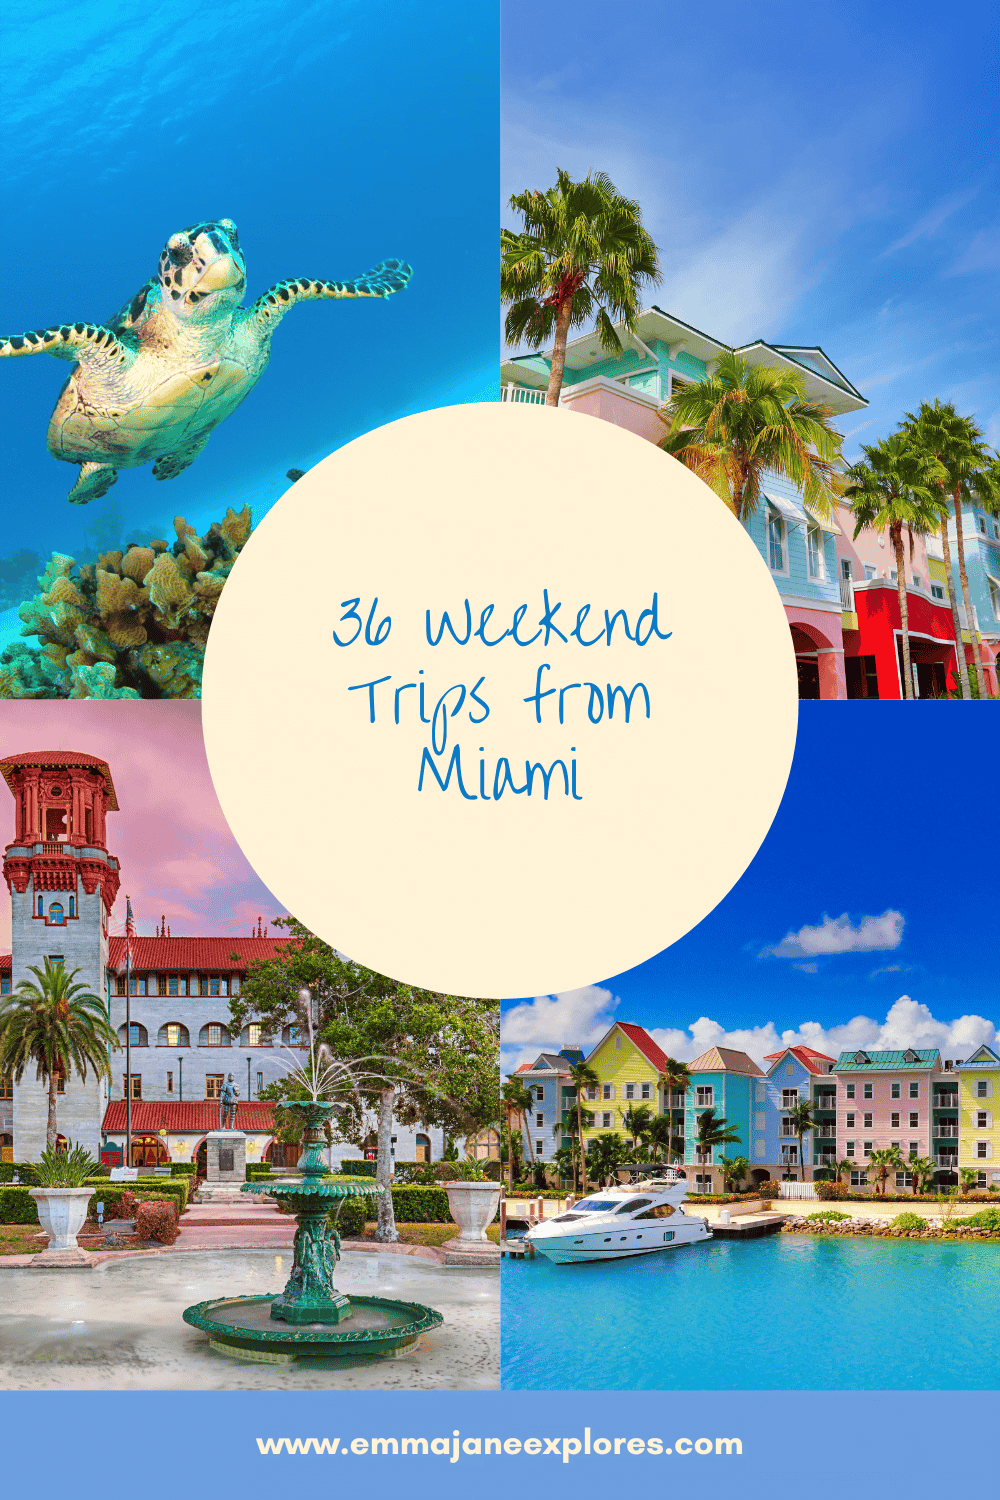 36 Weekend Trips from Miami, FL - Emma Jane Explores